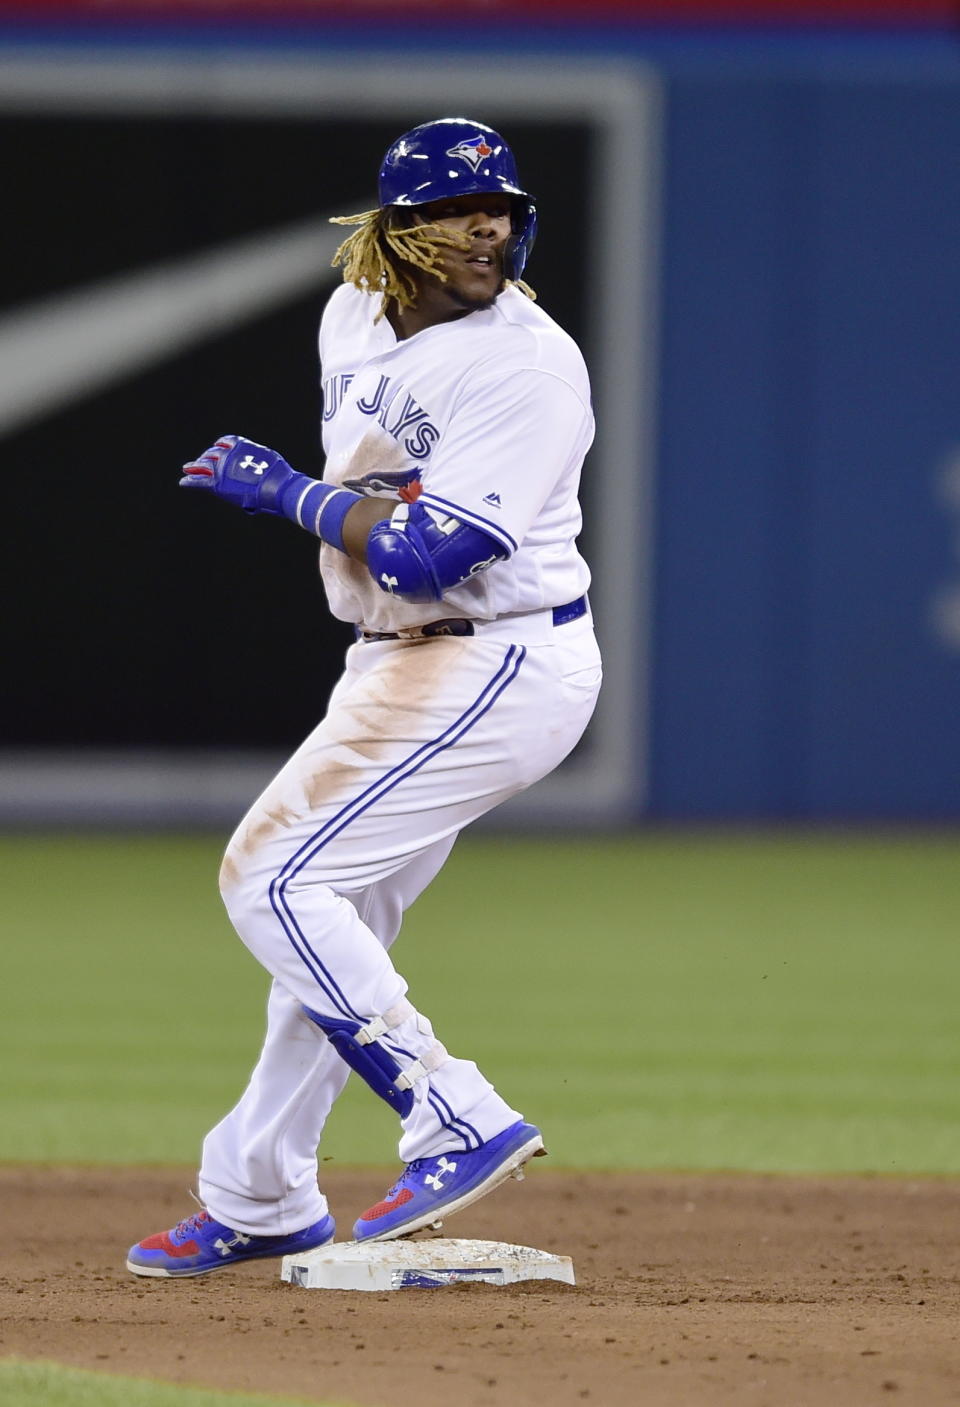 Toronto Blue Jays' Vladimir Guerrero Jr. is safe at second on a double against the Oakland Athletics during ninth-inning baseball game action in Toronto, Friday, April 26, 2019. (Frank Gunn/The Canadian Press via AP)